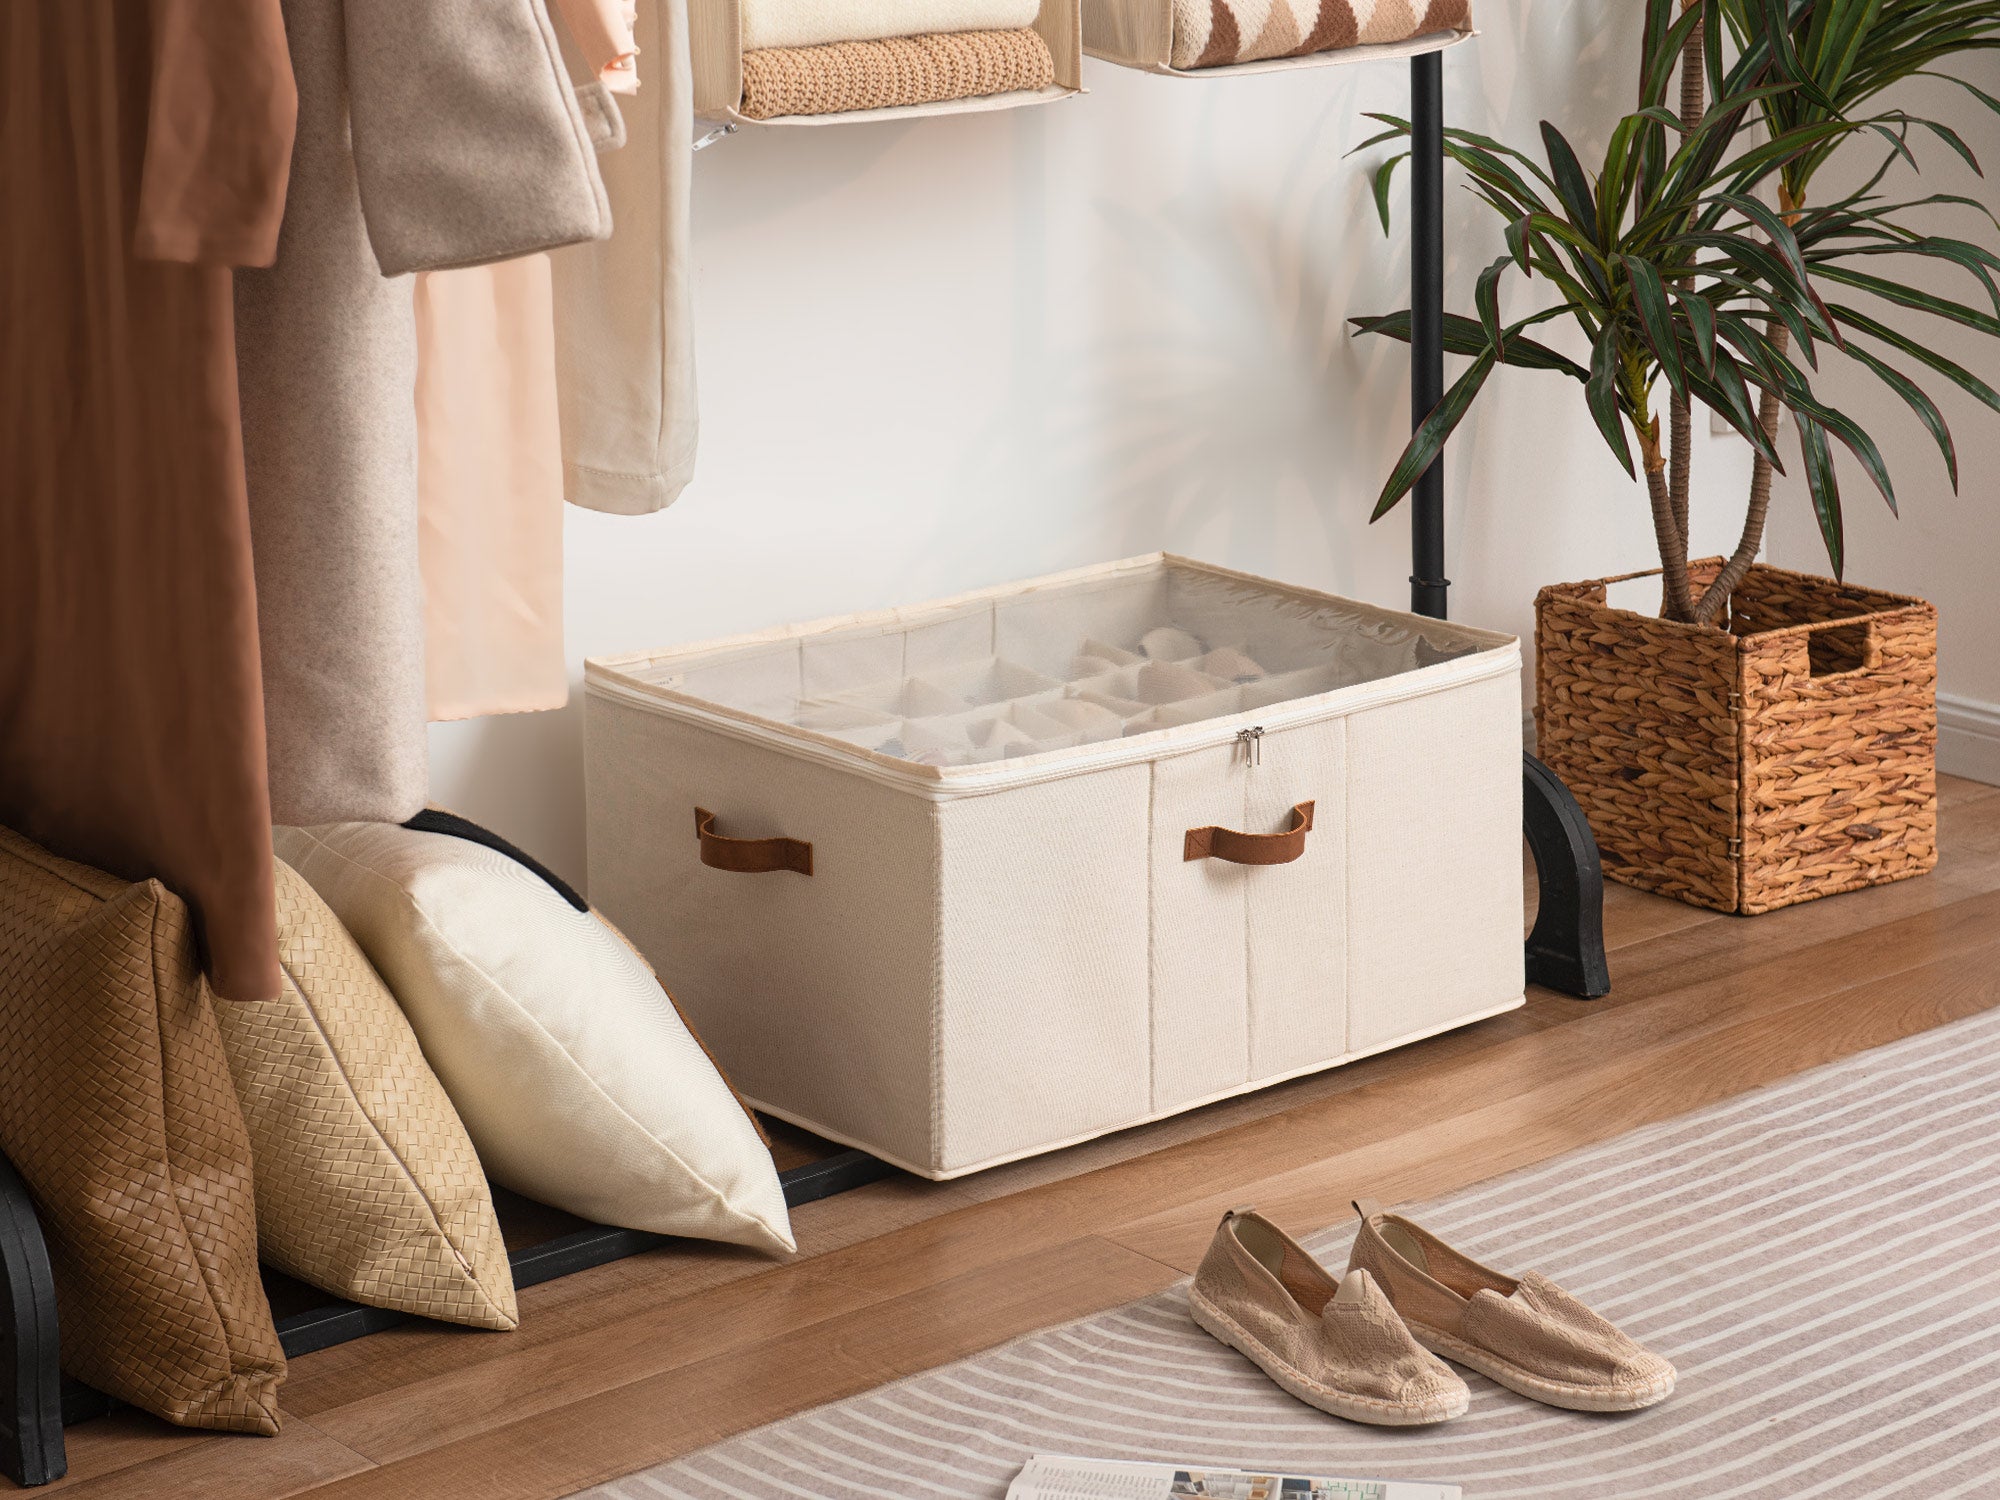 Large beige shoe storage organizer with PU handles featuring adjustable pop-out dividers under a clothes rack